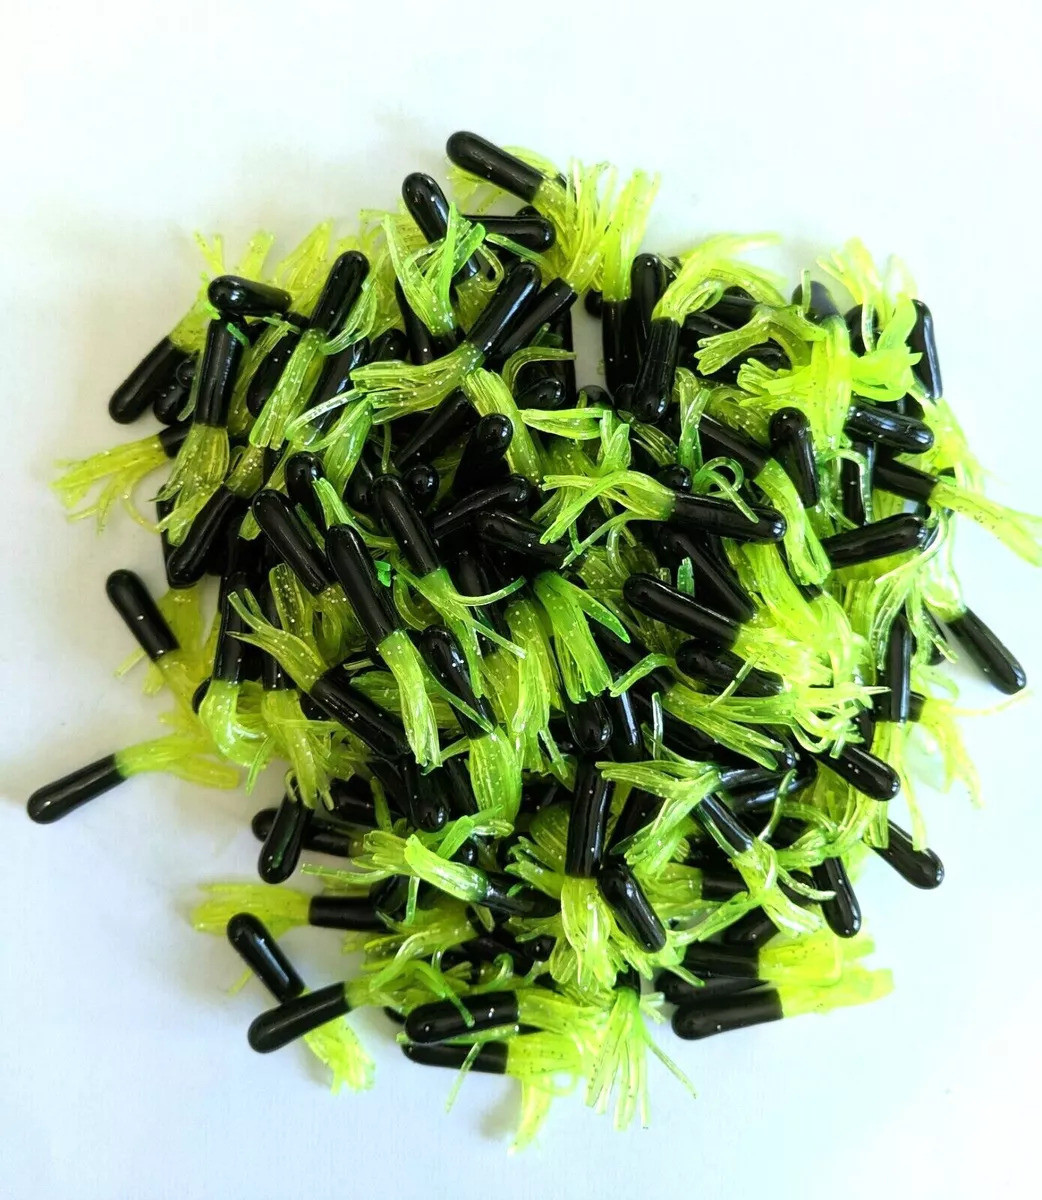 1.550/100PK CRAPPIE TUBES-BLACK WITH CHARTREUSE SHINE TAIL-BASS